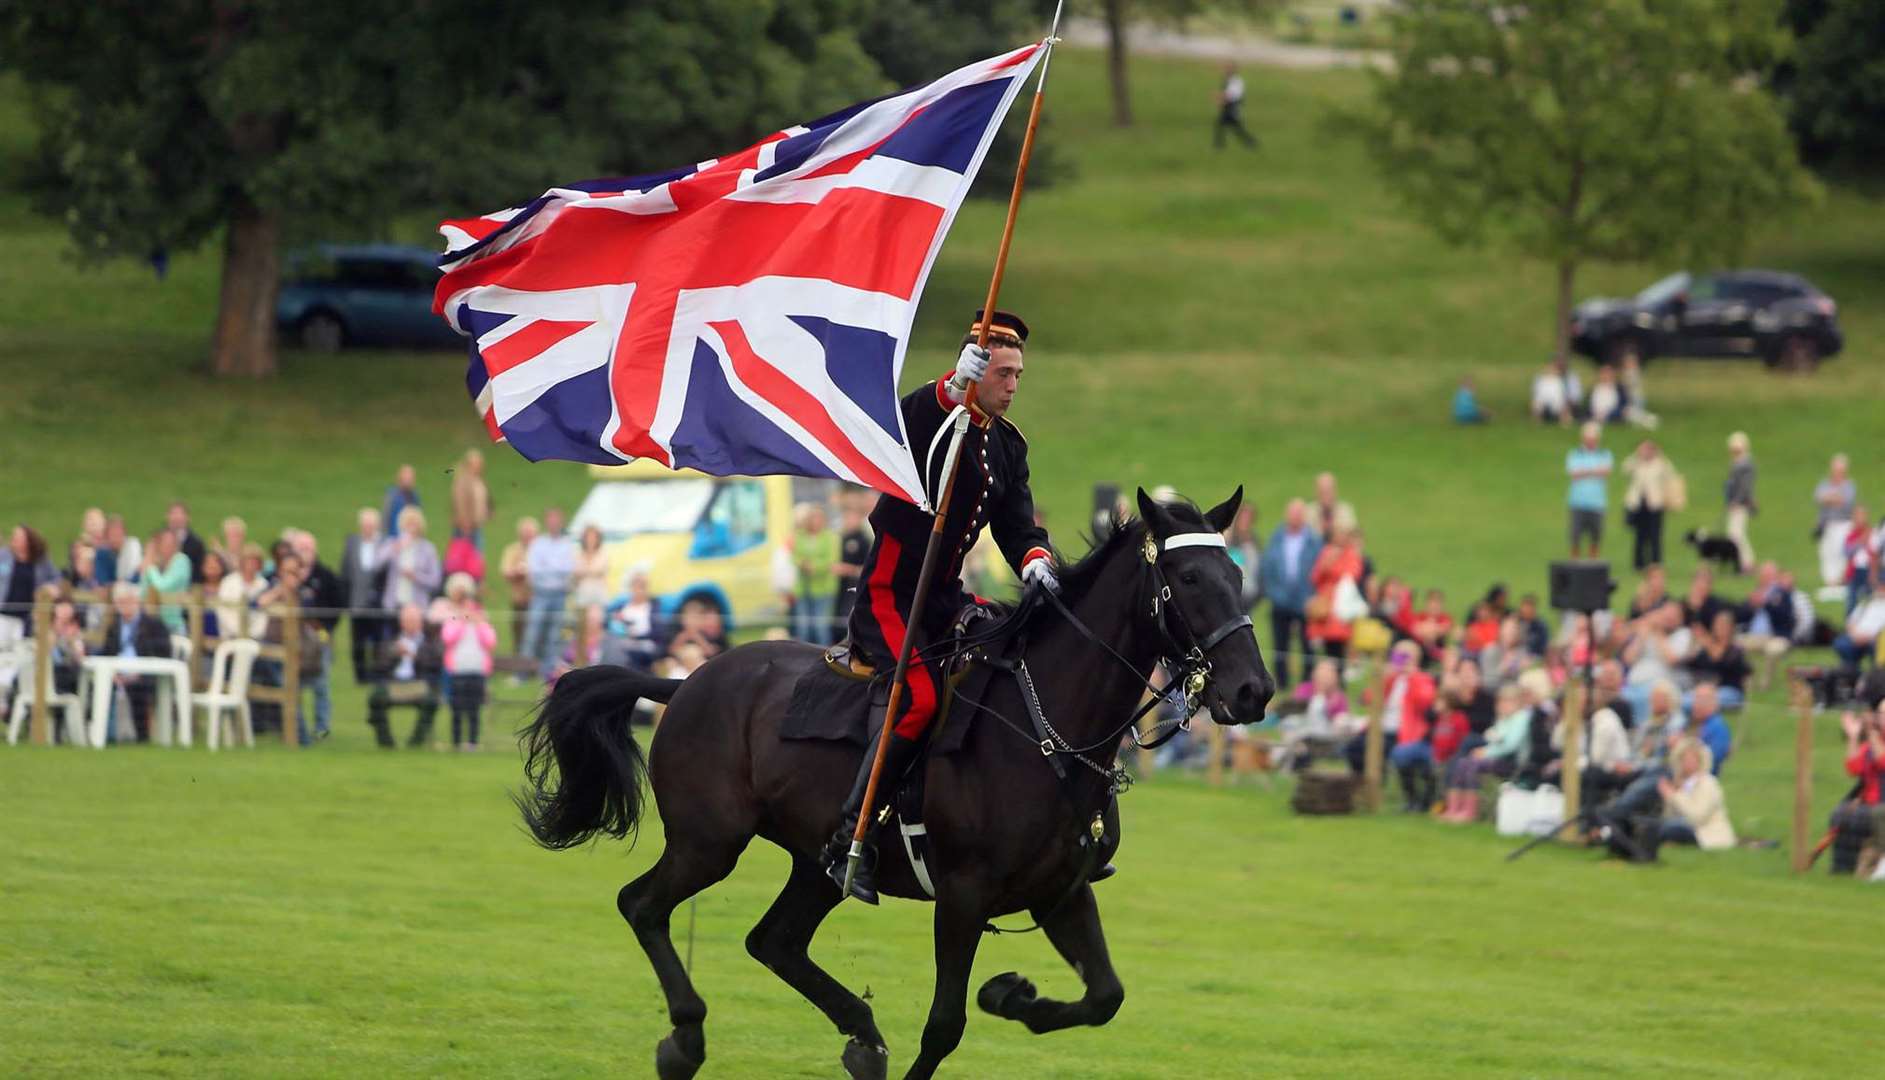 The Household Cavalry Mounted Regiment will be at the Kent County Show for 2018